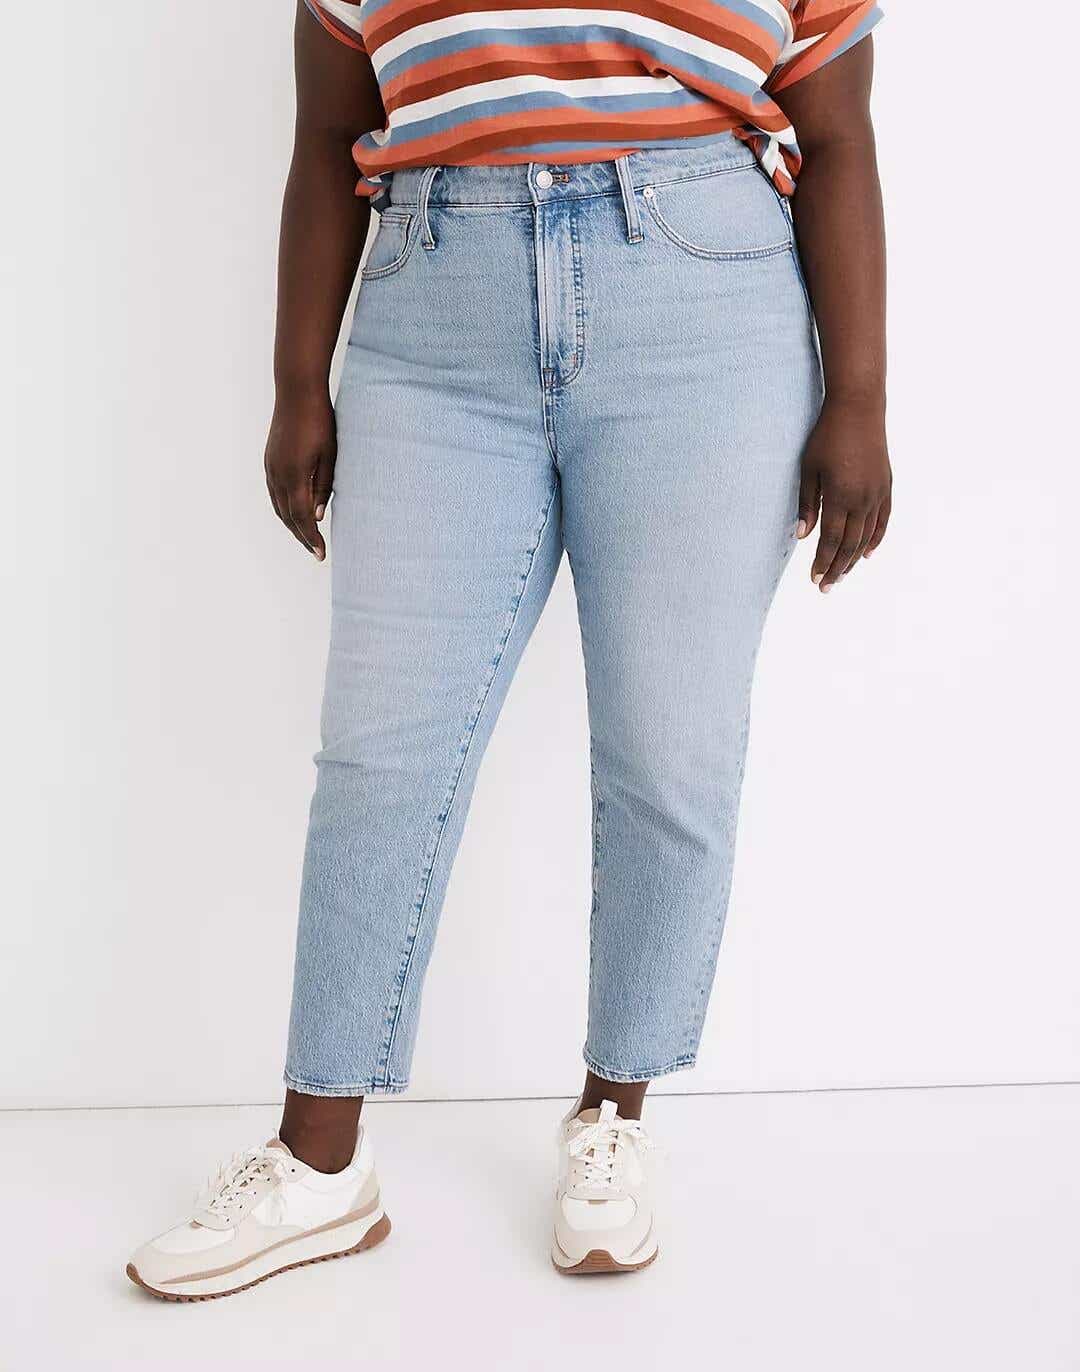 THE BEST JEANS REVIEWED - Katie Did What